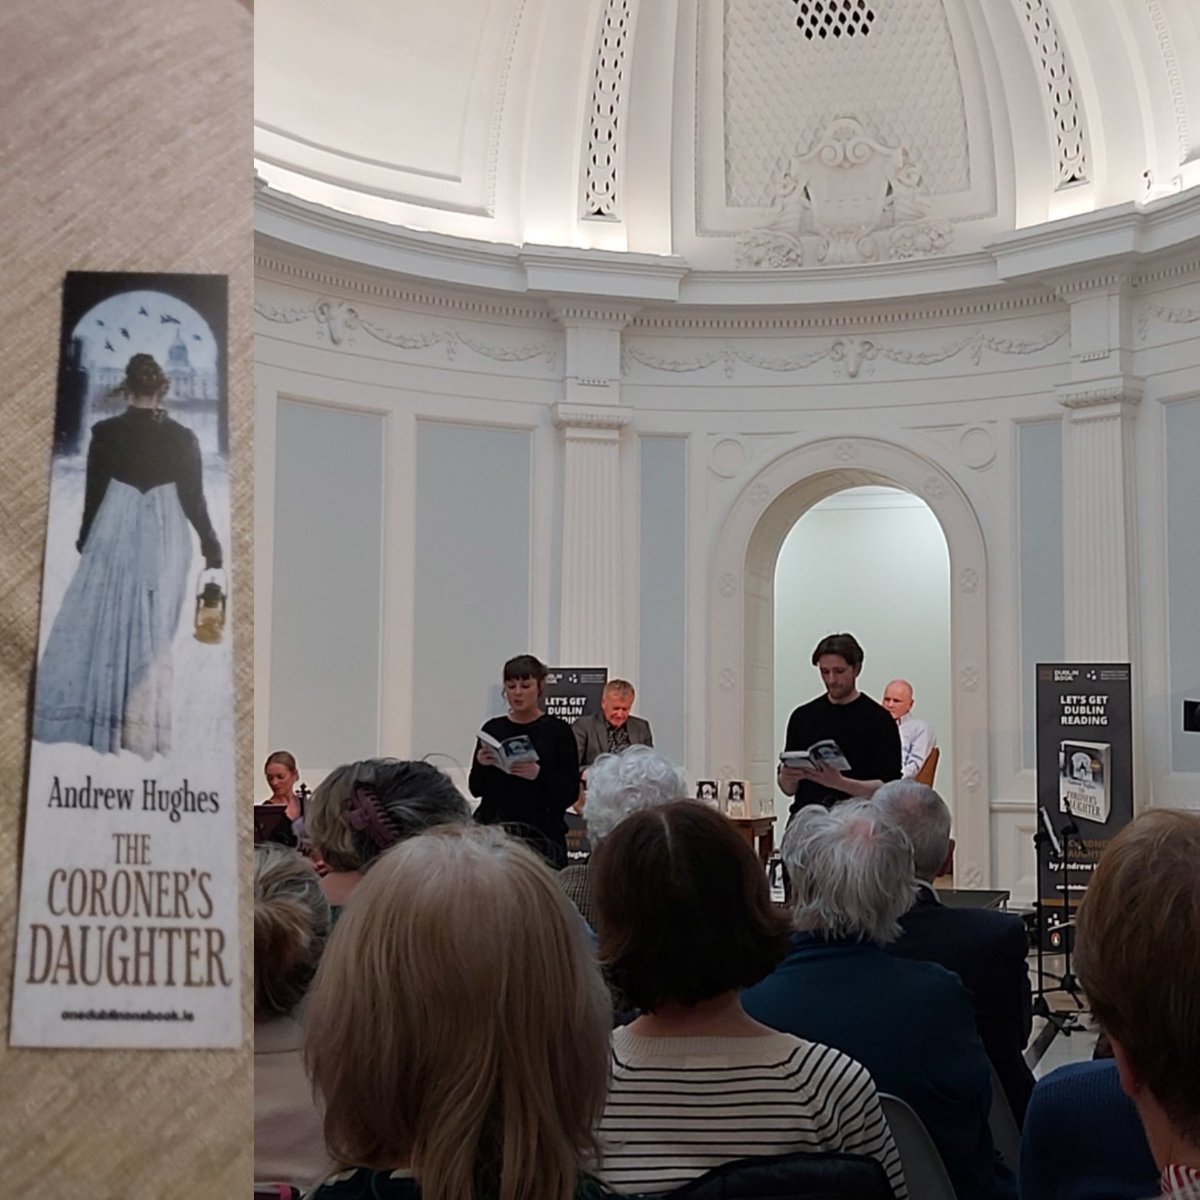 A lovely evening of music, readings and discussion with writer @And_Hughes on this year's  @1dublin1book @DublinCityofLit book selection 'The Coroner's Daughter' @TheHughLane this evening now off to order my copy  #LetsGetDublinReading